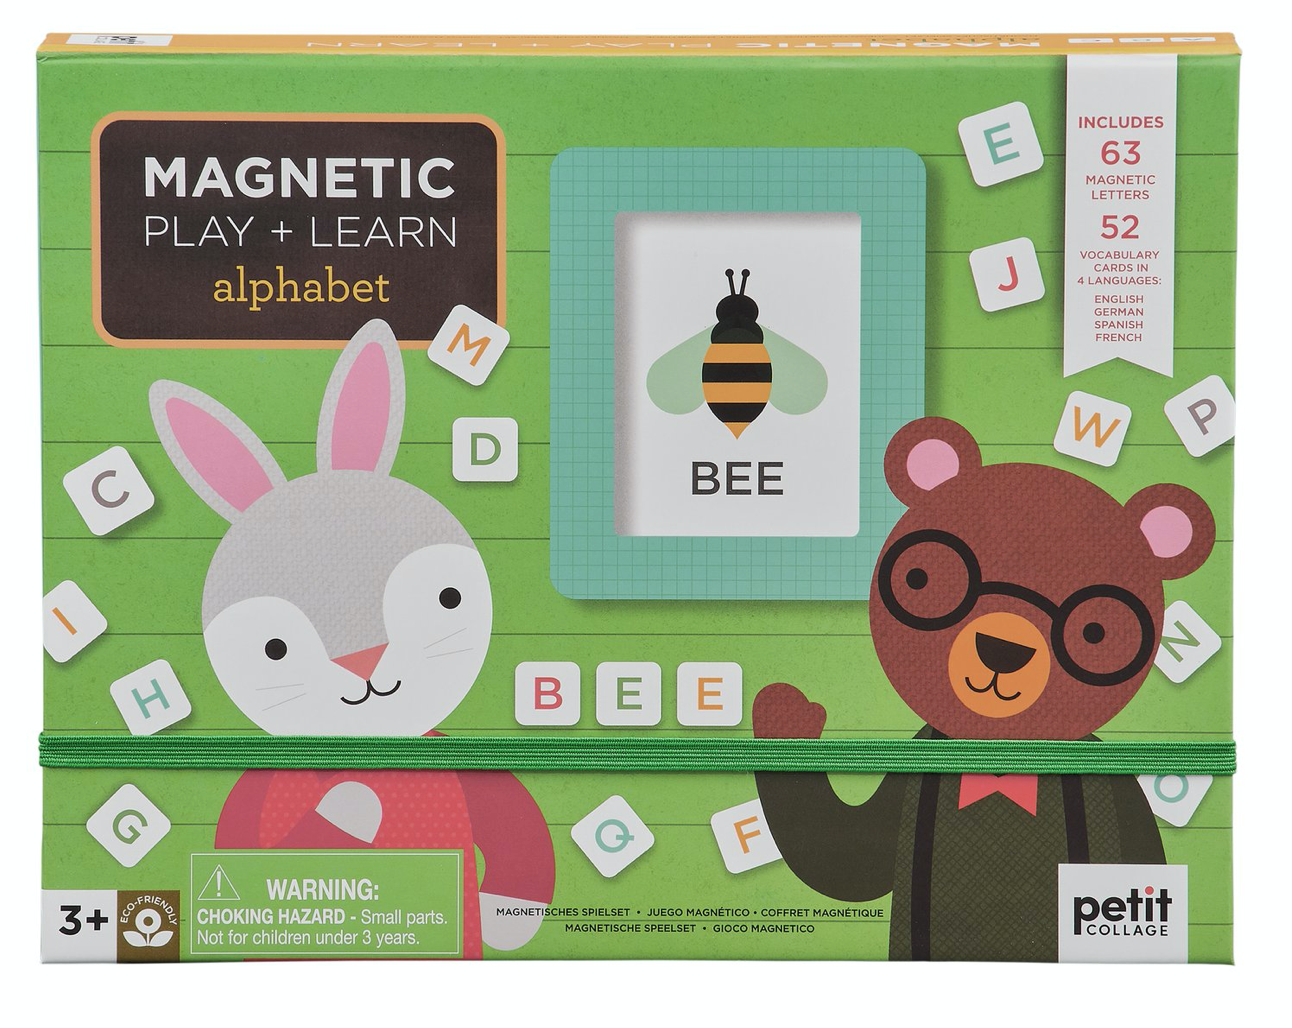 Petit Collage Magnetic Play + Learn Alphabet